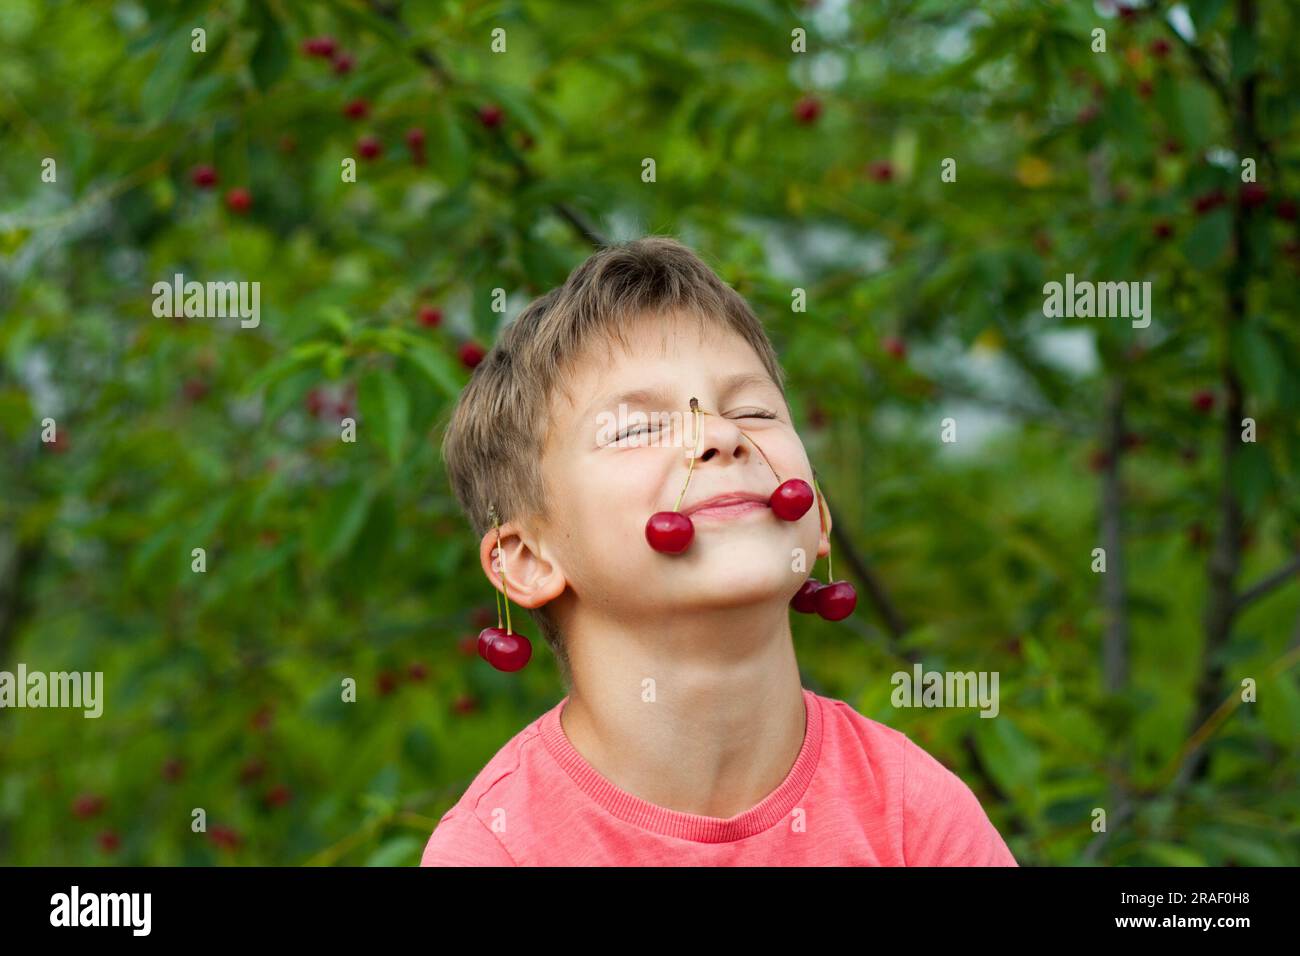 boy picking ripe red cherries from tree in garden. Portrait of happy child with cherries on ears and nose background of cherry orchard. summer harvest Stock Photo